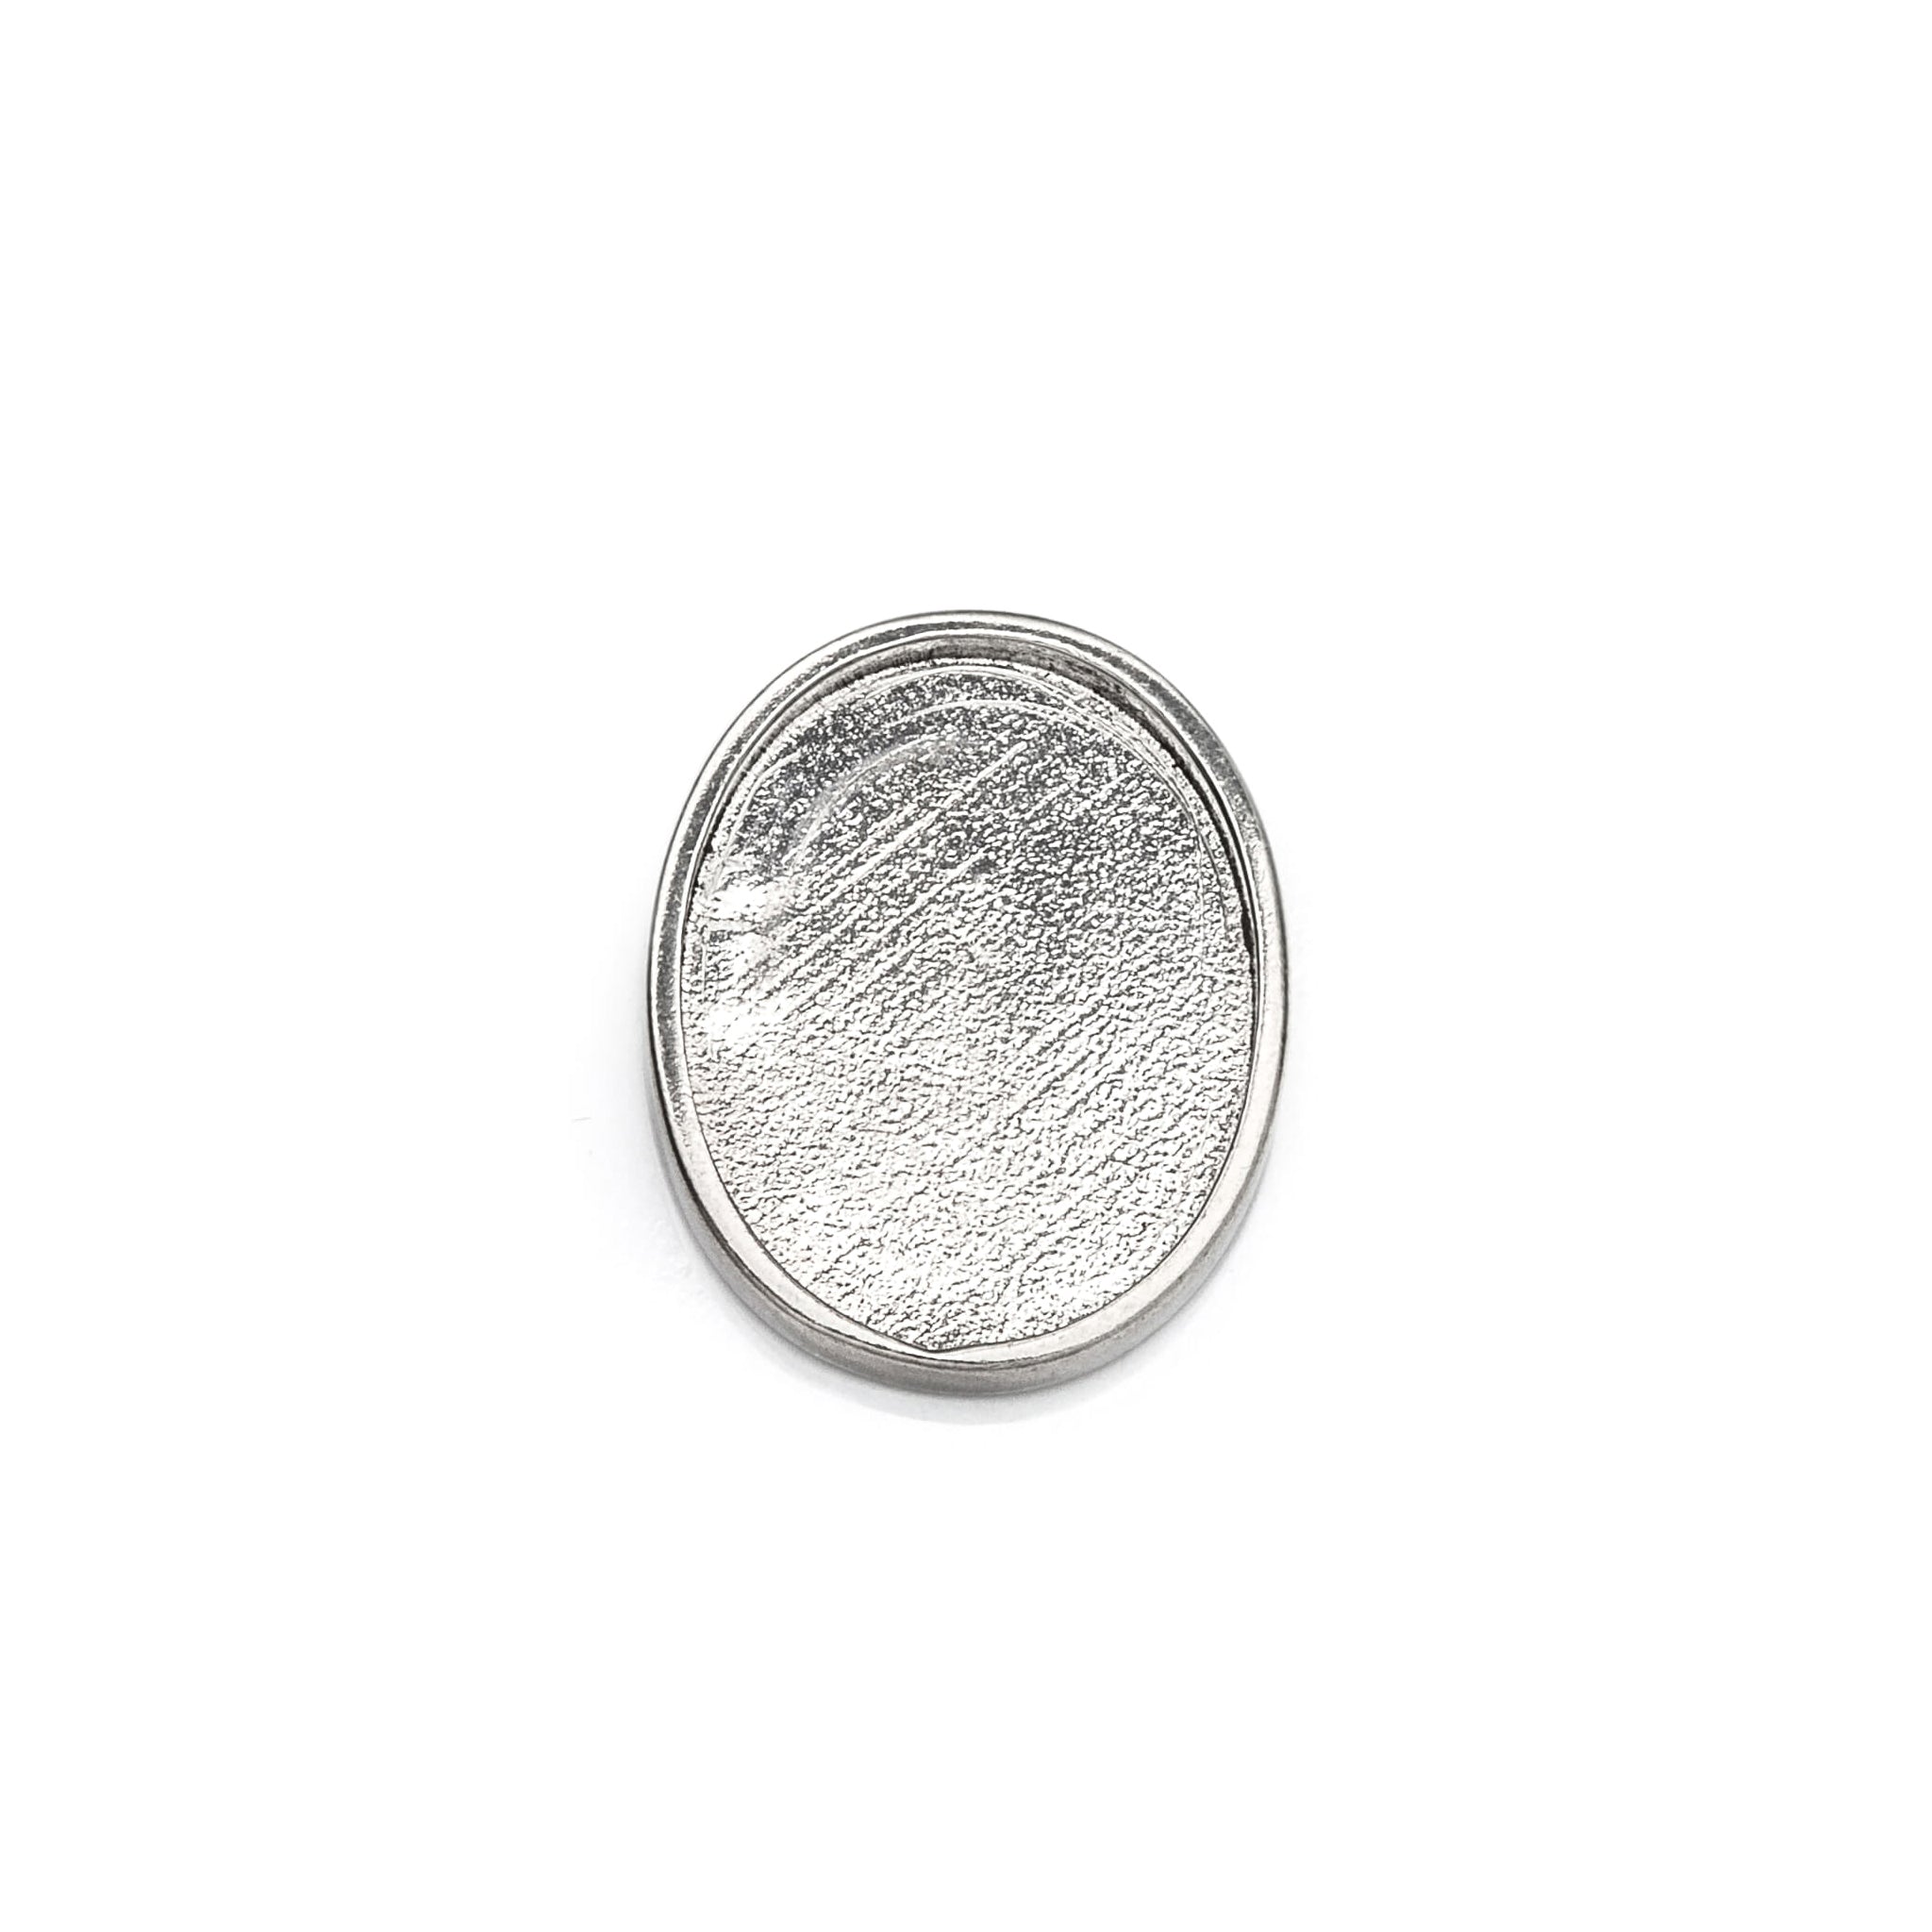 Oval Multi-Purpose Jeweler Setting Pendant with Oval Bezel Mounting in Sterling Silver - Various Sizes